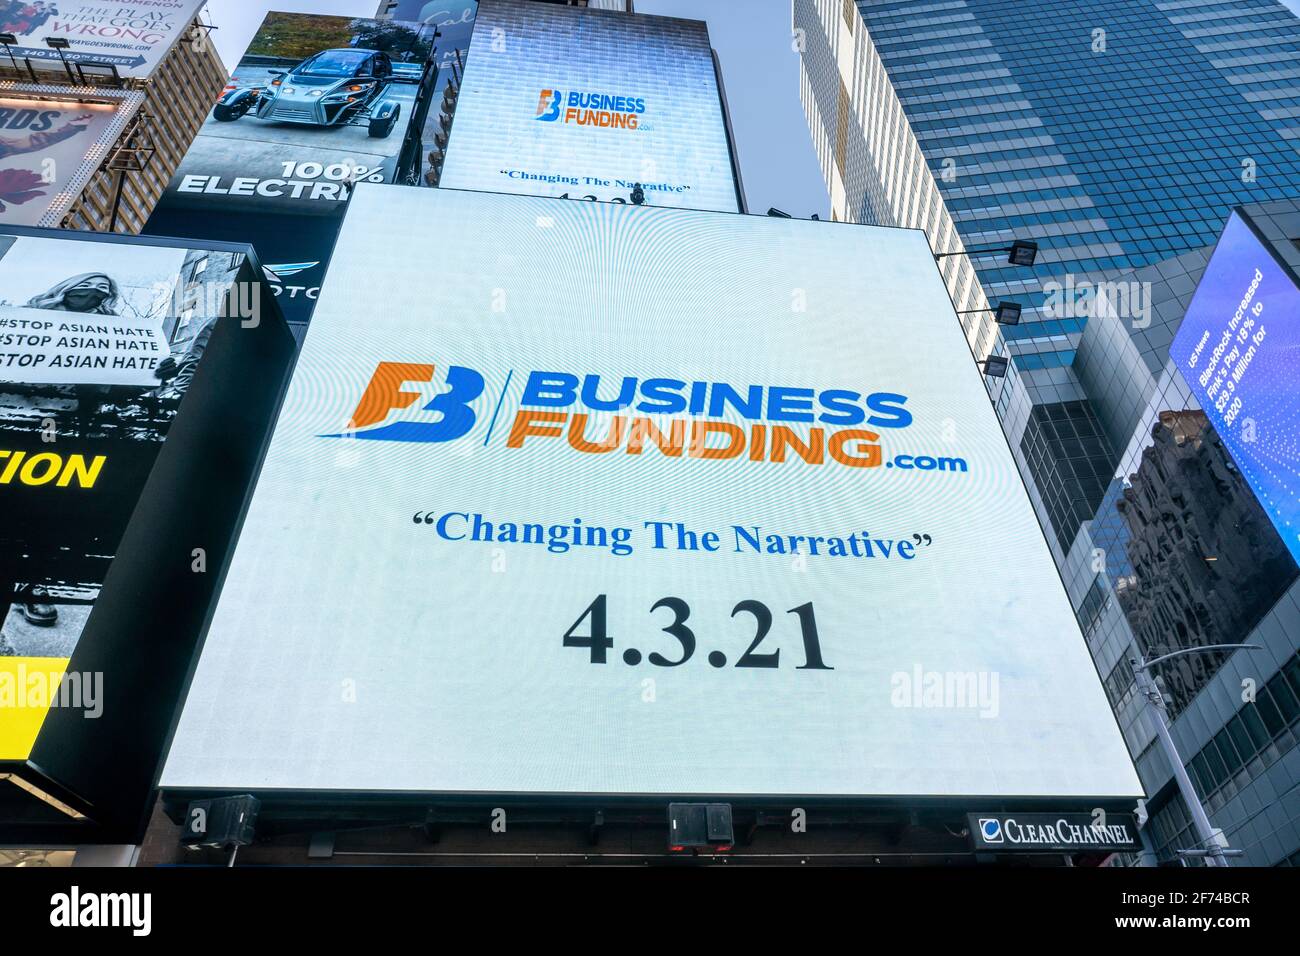 NEW YORK, NY – APRIL 3: A billboard sign of BusinessFunding.Com seen during a BusinessFunding.Com lunch event at Times Square on April 3, 2021 in New Stock Photo